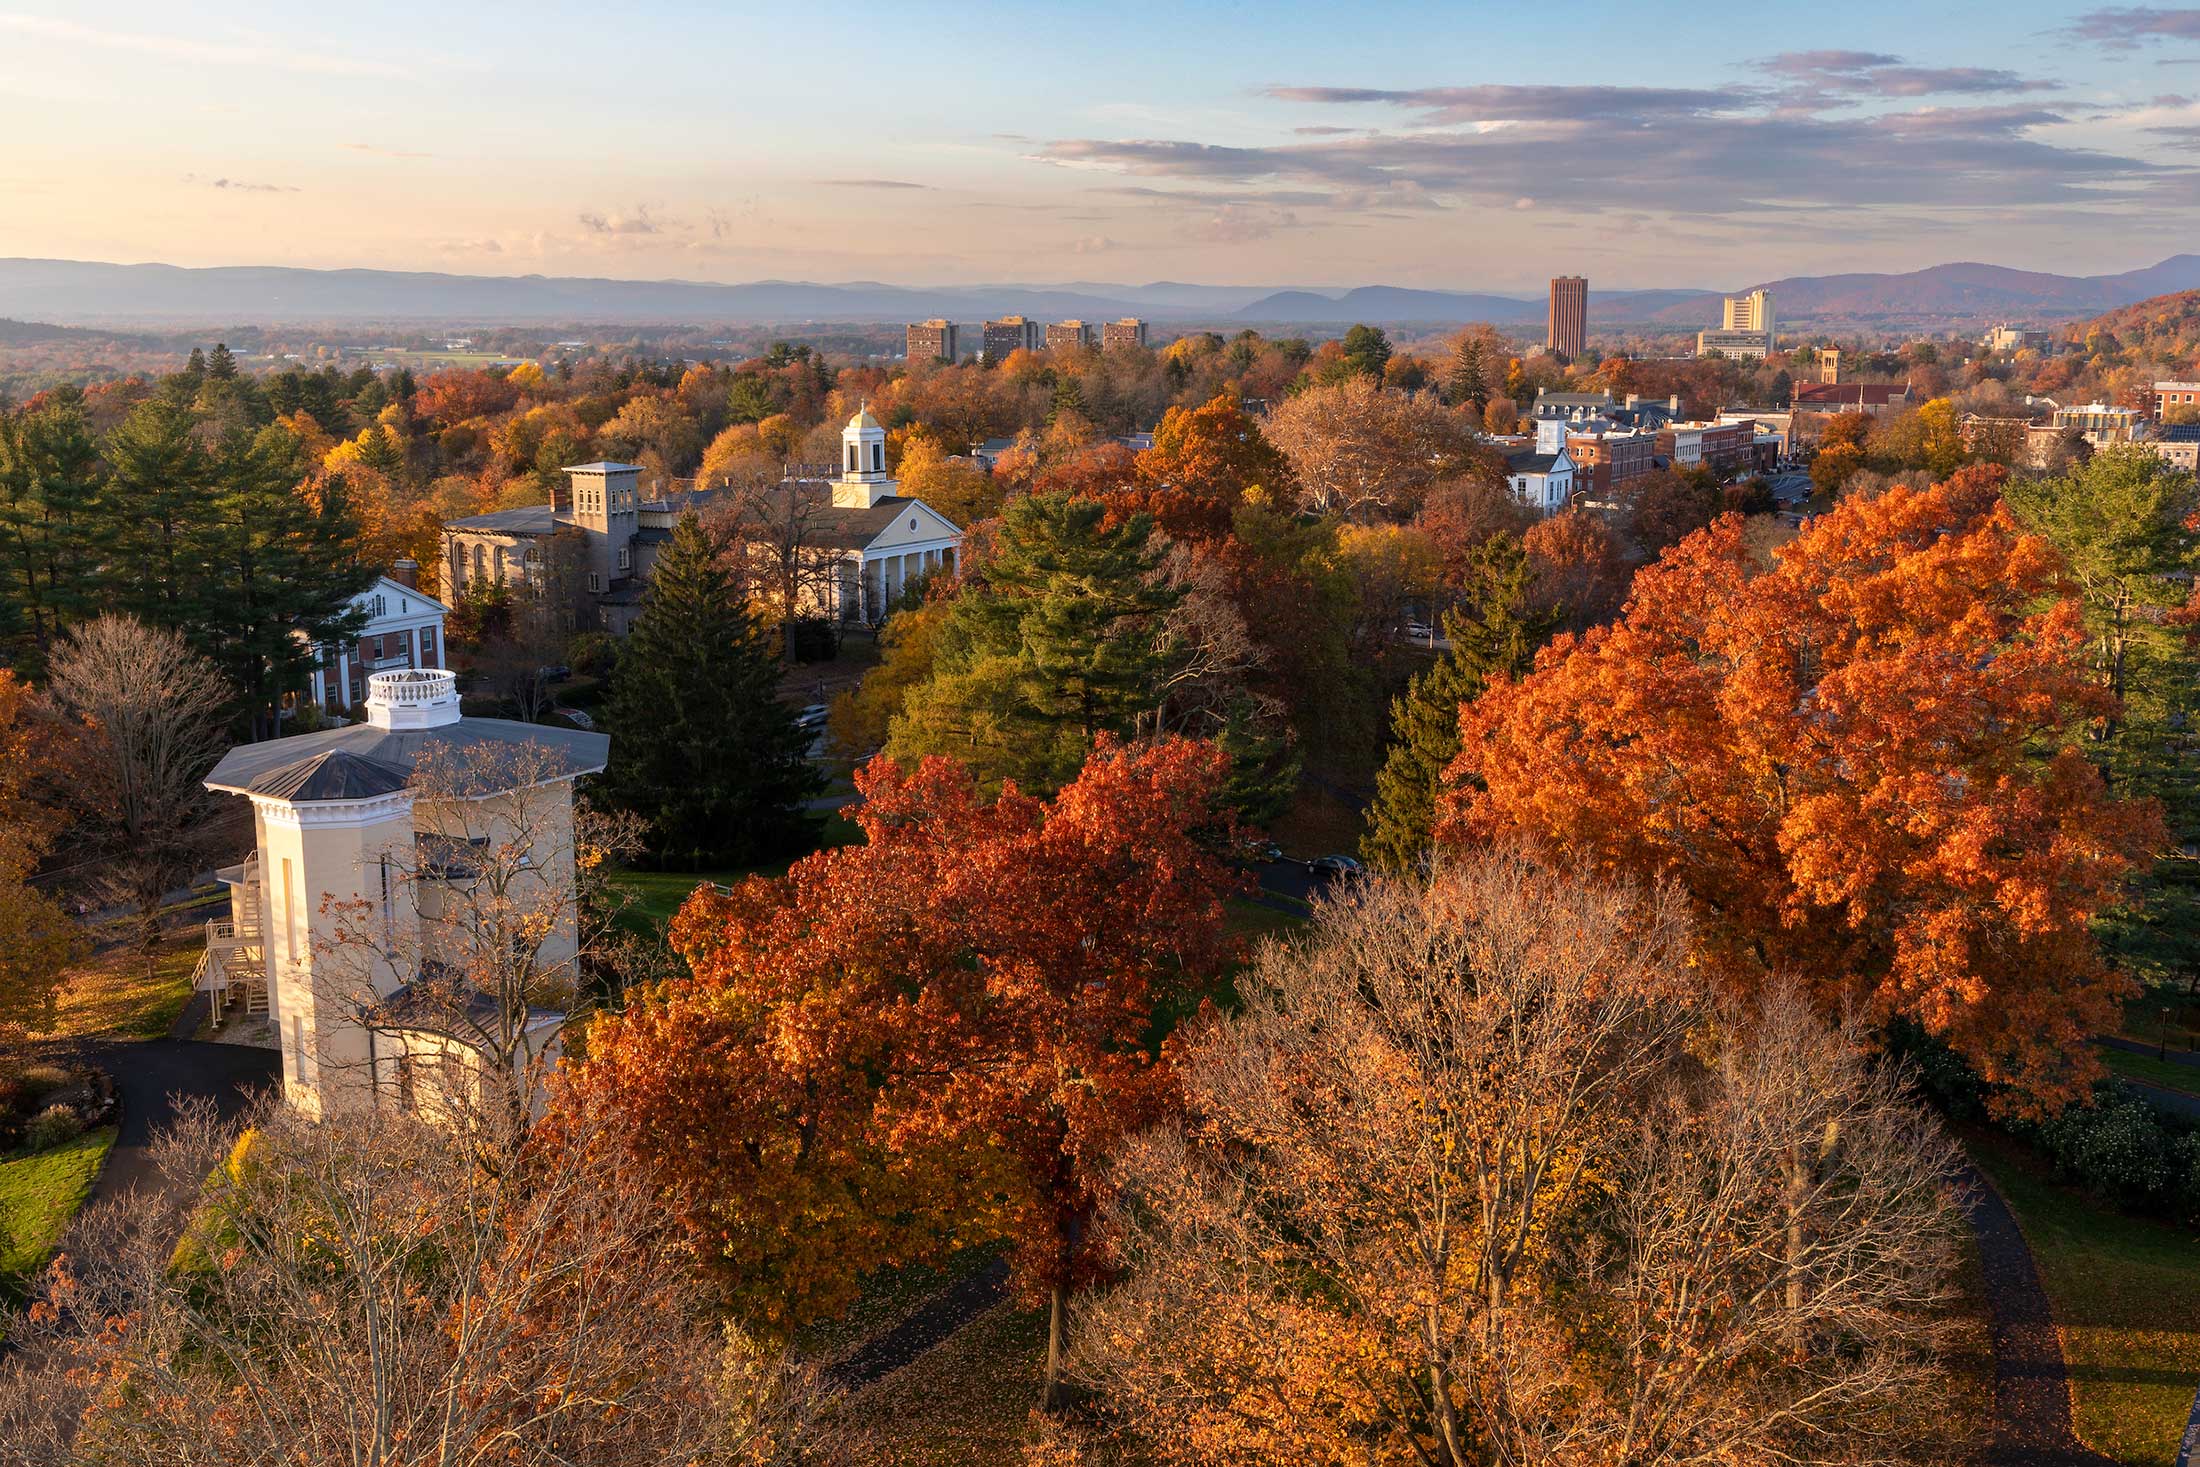 An aerial view from the Amherst College campus with the town of Amherst seen in the distance.